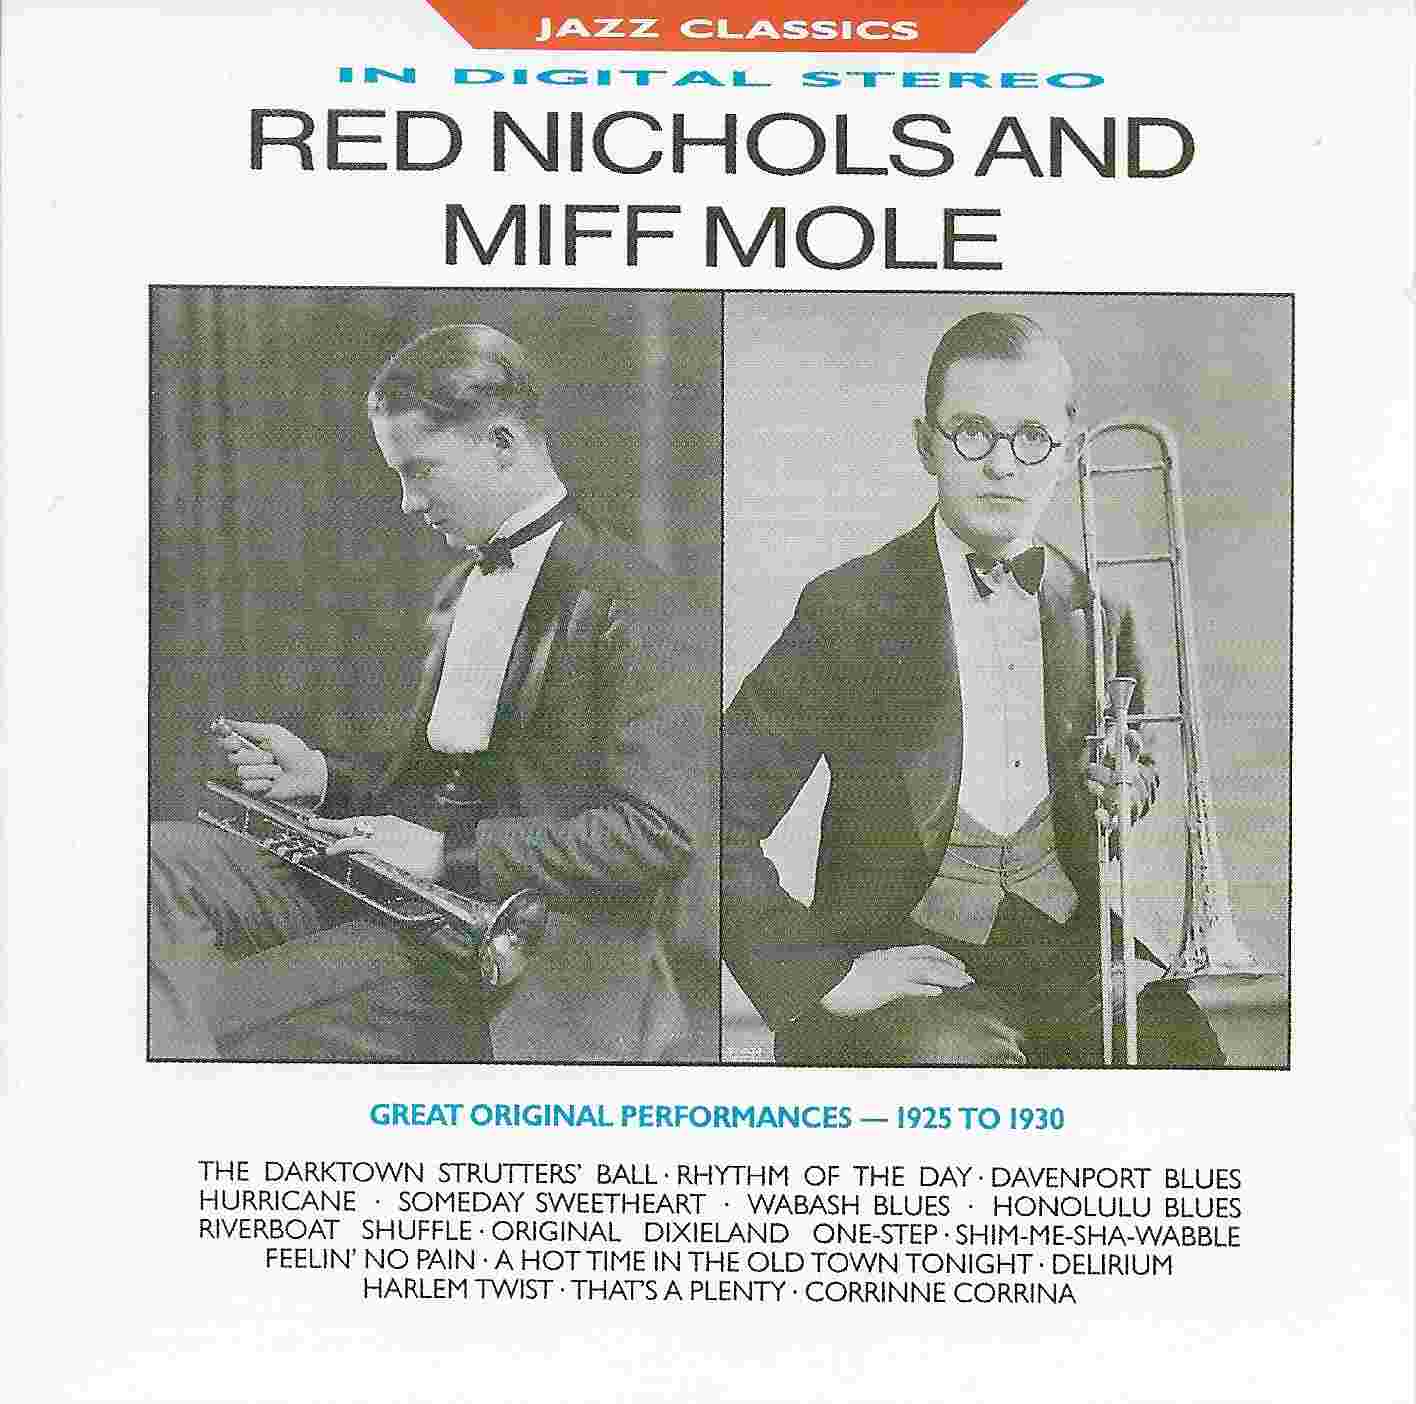 Picture of BBCCD664 Jazz classics - Red Nichols and Miff Mole by artist Nichols / Mole from the BBC cds - Records and Tapes library